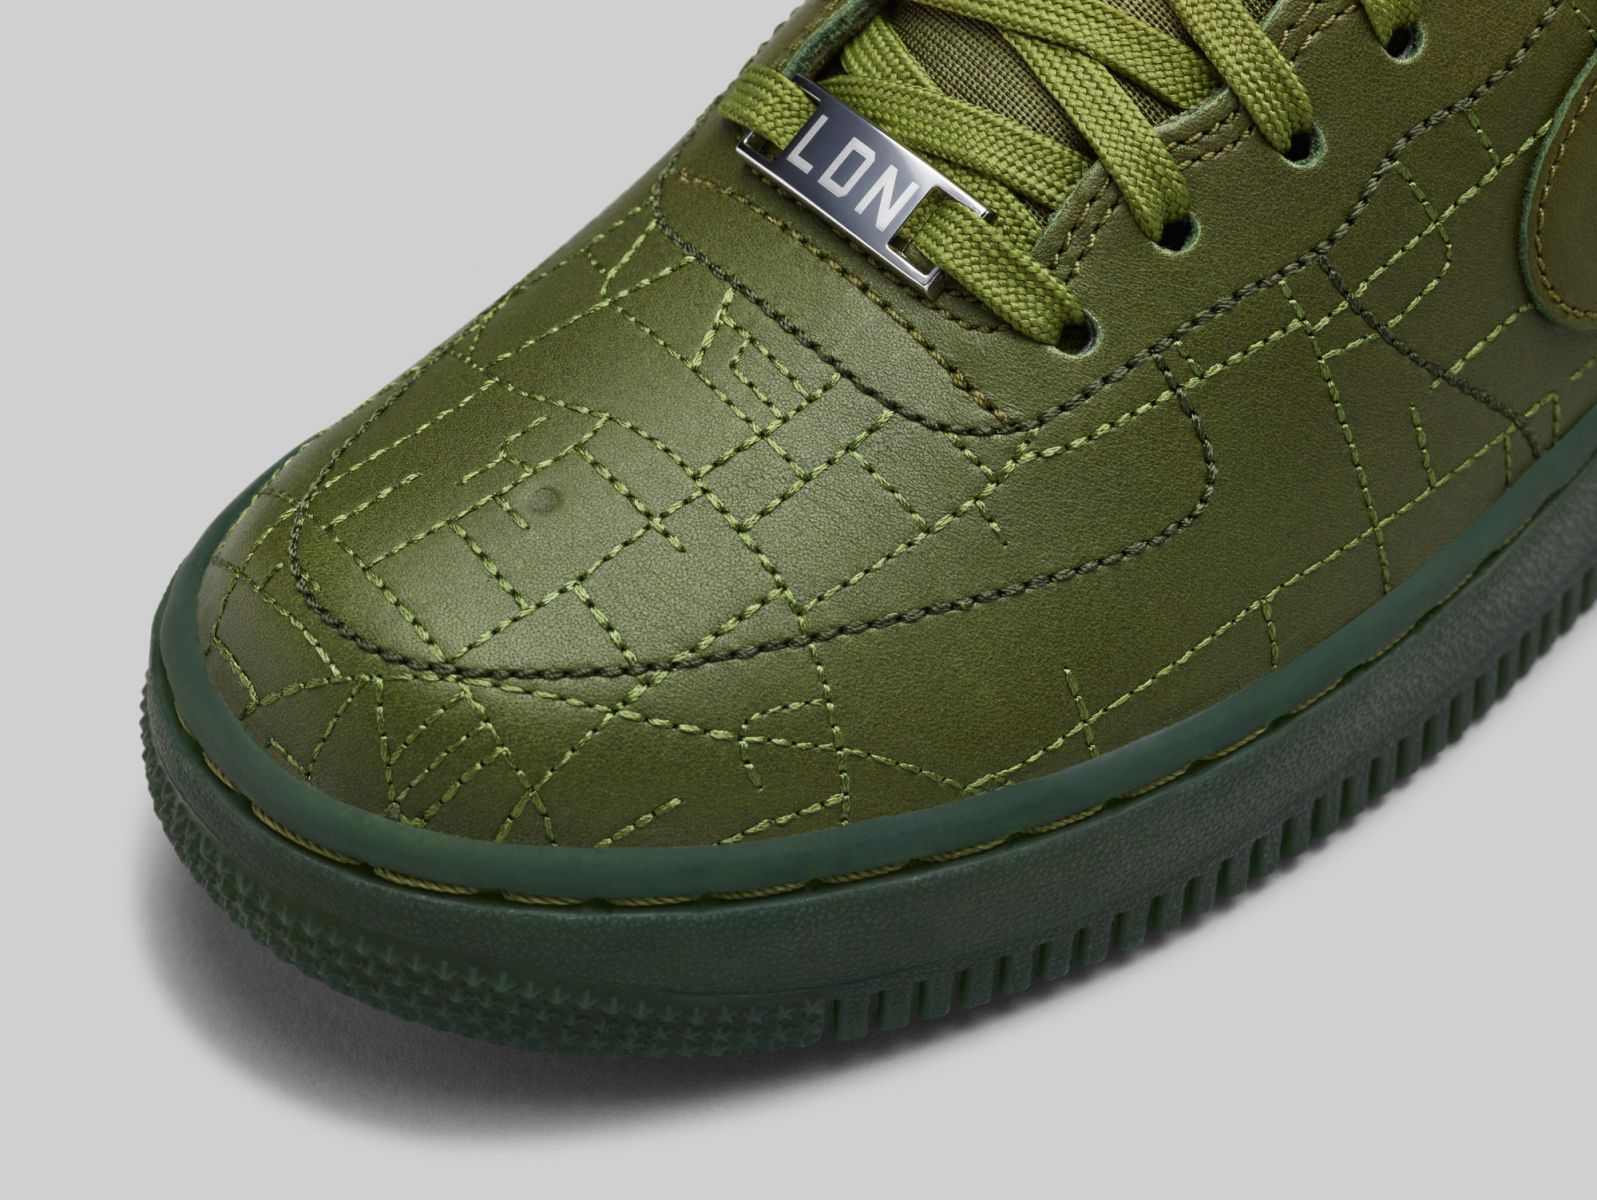 nike air force 1 limited edition green